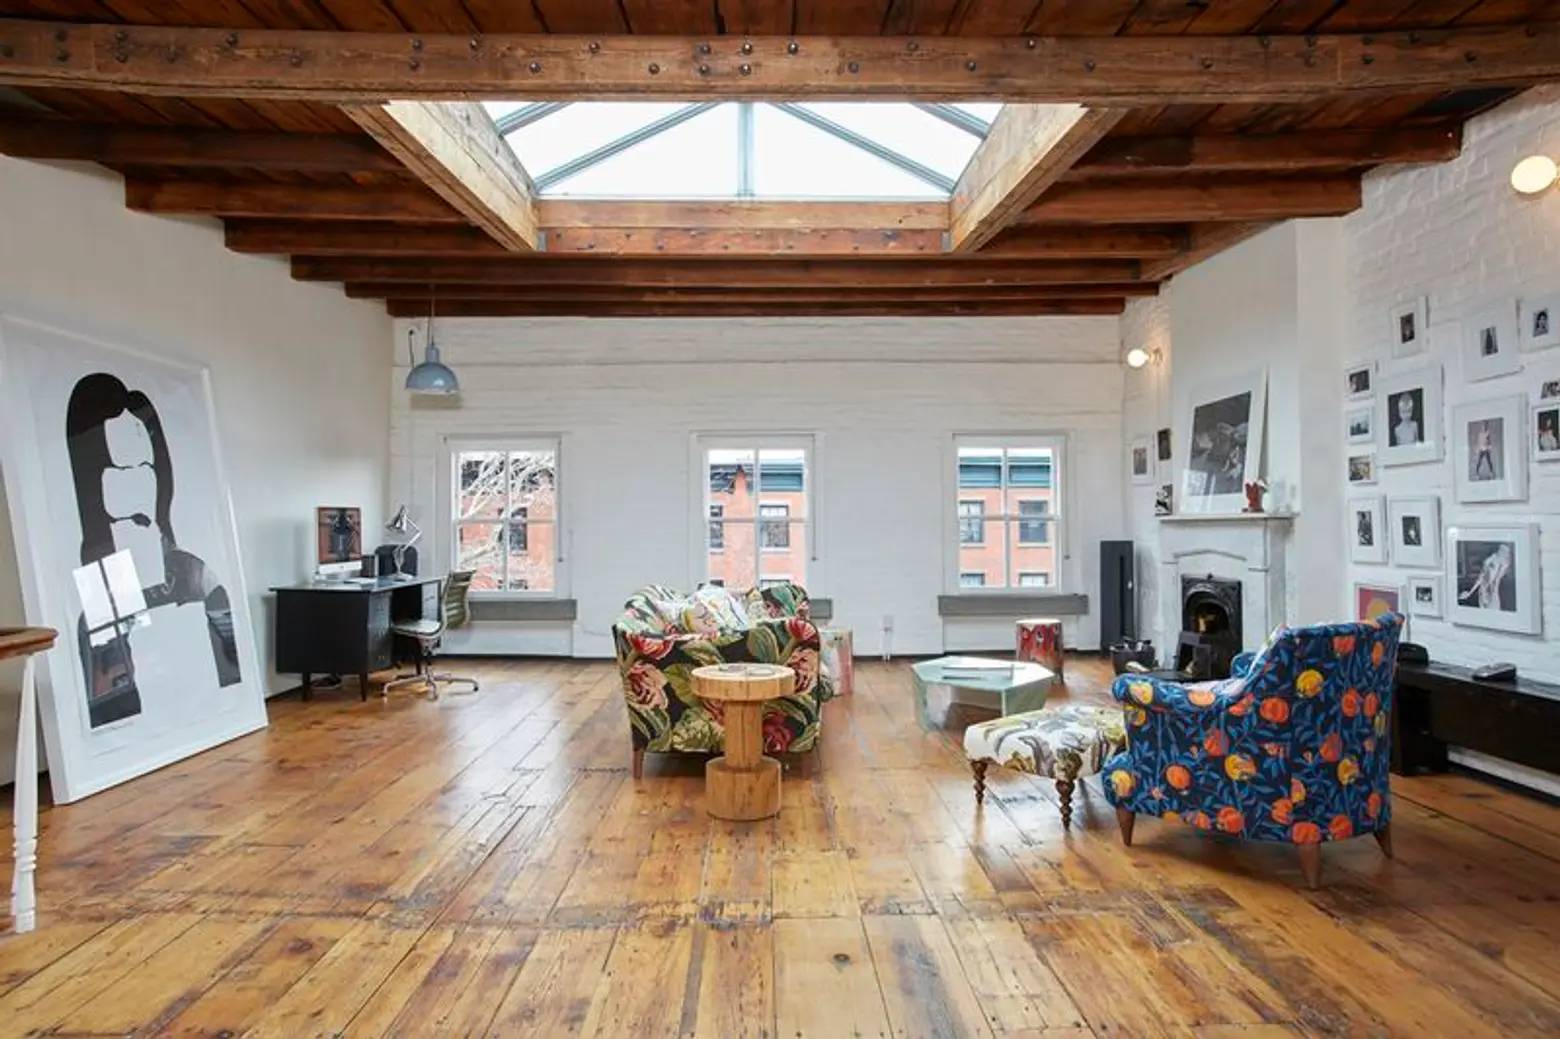 $5M Home in Boerum Hill Combines Townhouse and Loft Aesthetics